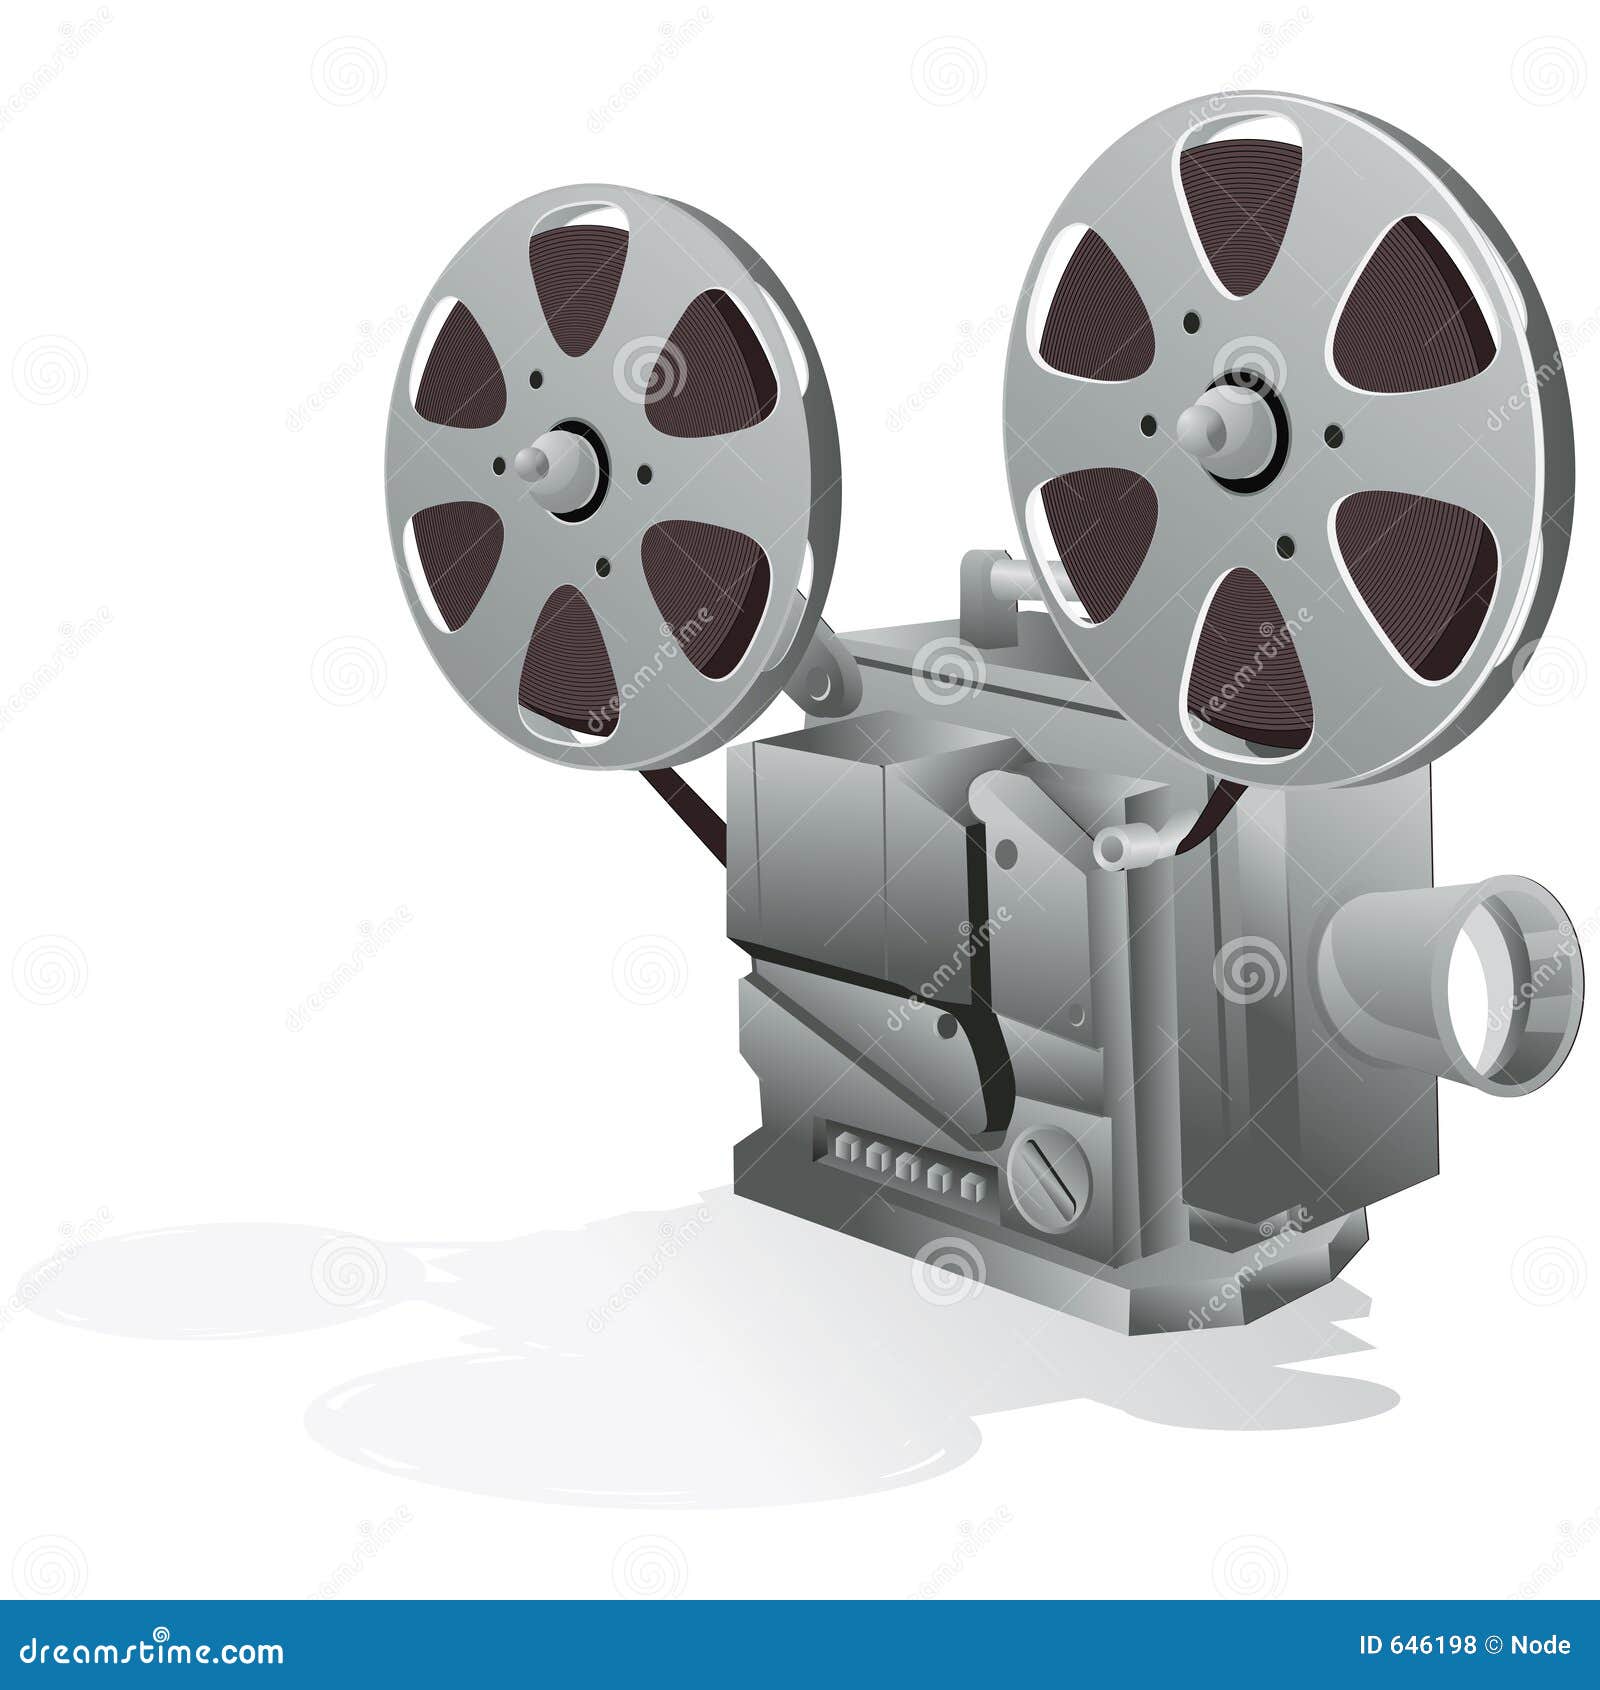 clipart of movie projector - photo #5